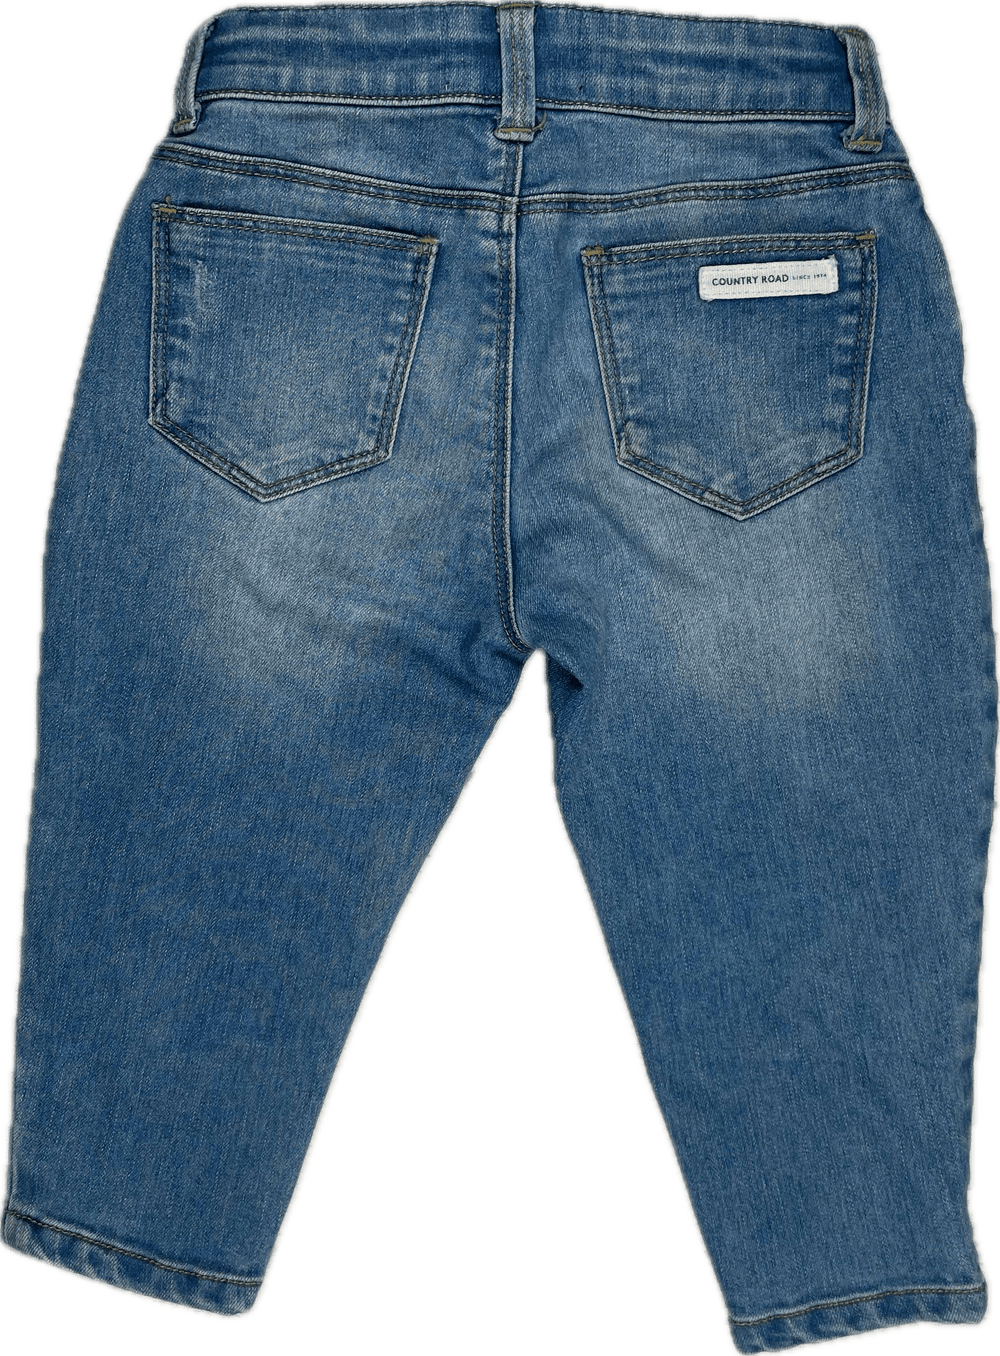 Country Road Tapered Ripped Denim Jeans -Size 2 - Jean Pool